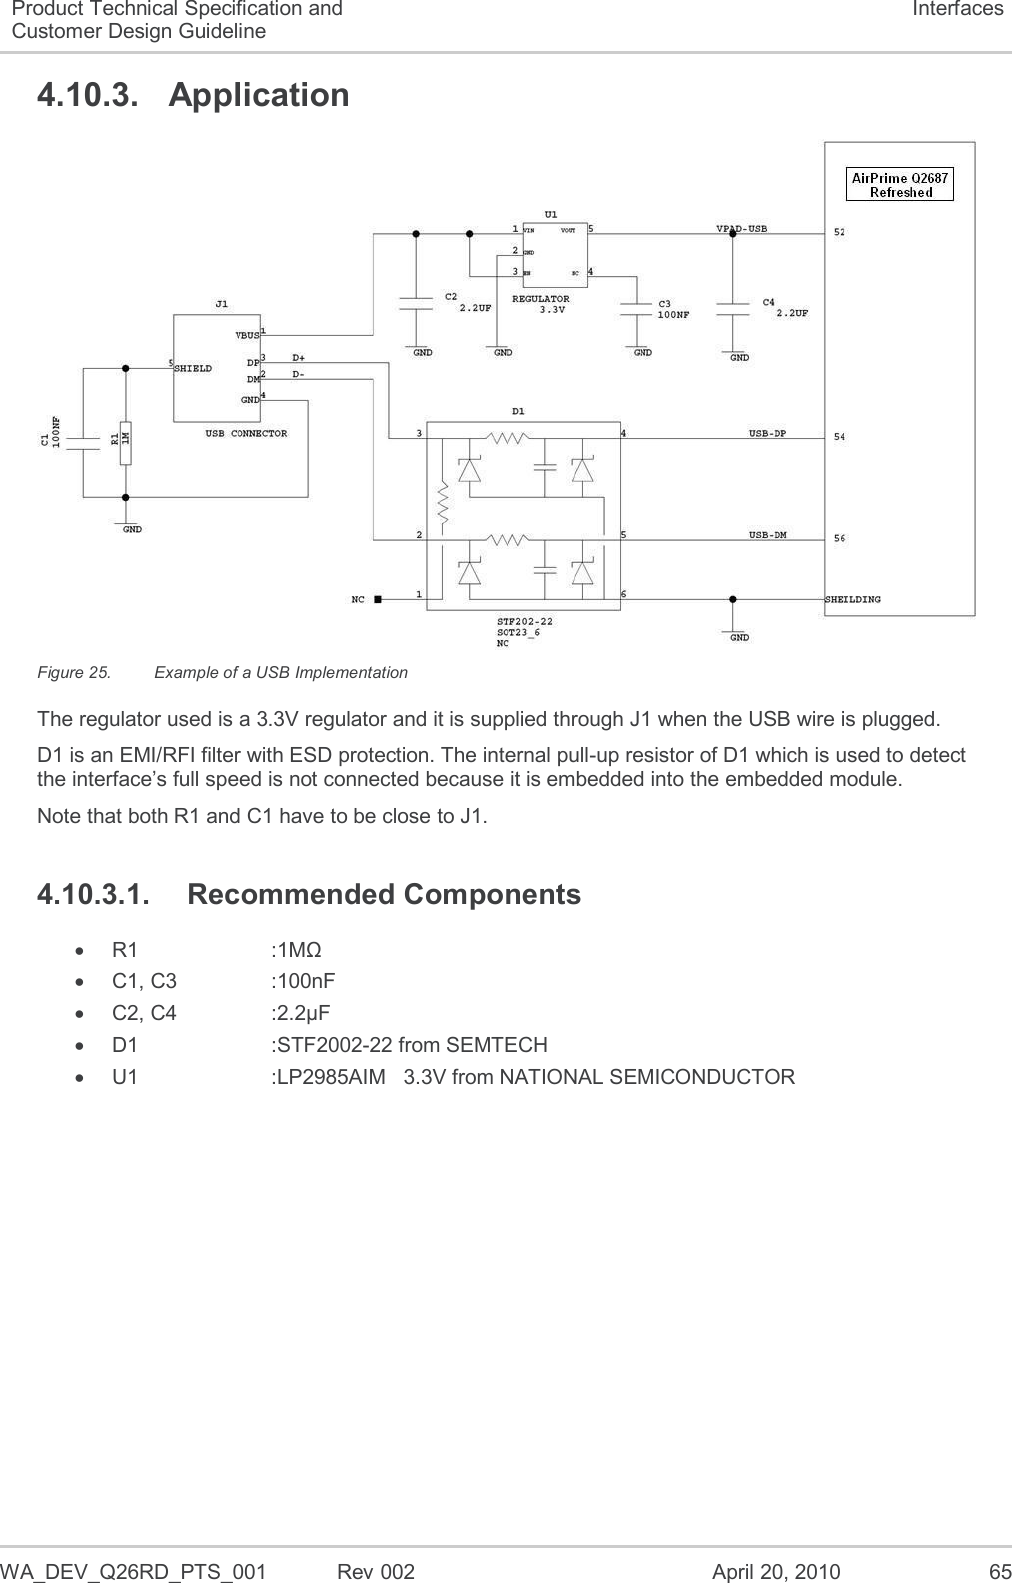  WA_DEV_Q26RD_PTS_001  Rev 002  April 20, 2010 65 Product Technical Specification and Customer Design Guideline Interfaces 4.10.3.  Application  Figure 25.  Example of a USB Implementation The regulator used is a 3.3V regulator and it is supplied through J1 when the USB wire is plugged. D1 is an EMI/RFI filter with ESD protection. The internal pull-up resistor of D1 which is used to detect the interface’s full speed is not connected because it is embedded into the embedded module. Note that both R1 and C1 have to be close to J1. 4.10.3.1.  Recommended Components  R1      :1MΩ   C1, C3    :100nF   C2, C4    :2.2µF  D1      :STF2002-22 from SEMTECH  U1      :LP2985AIM   3.3V from NATIONAL SEMICONDUCTOR   